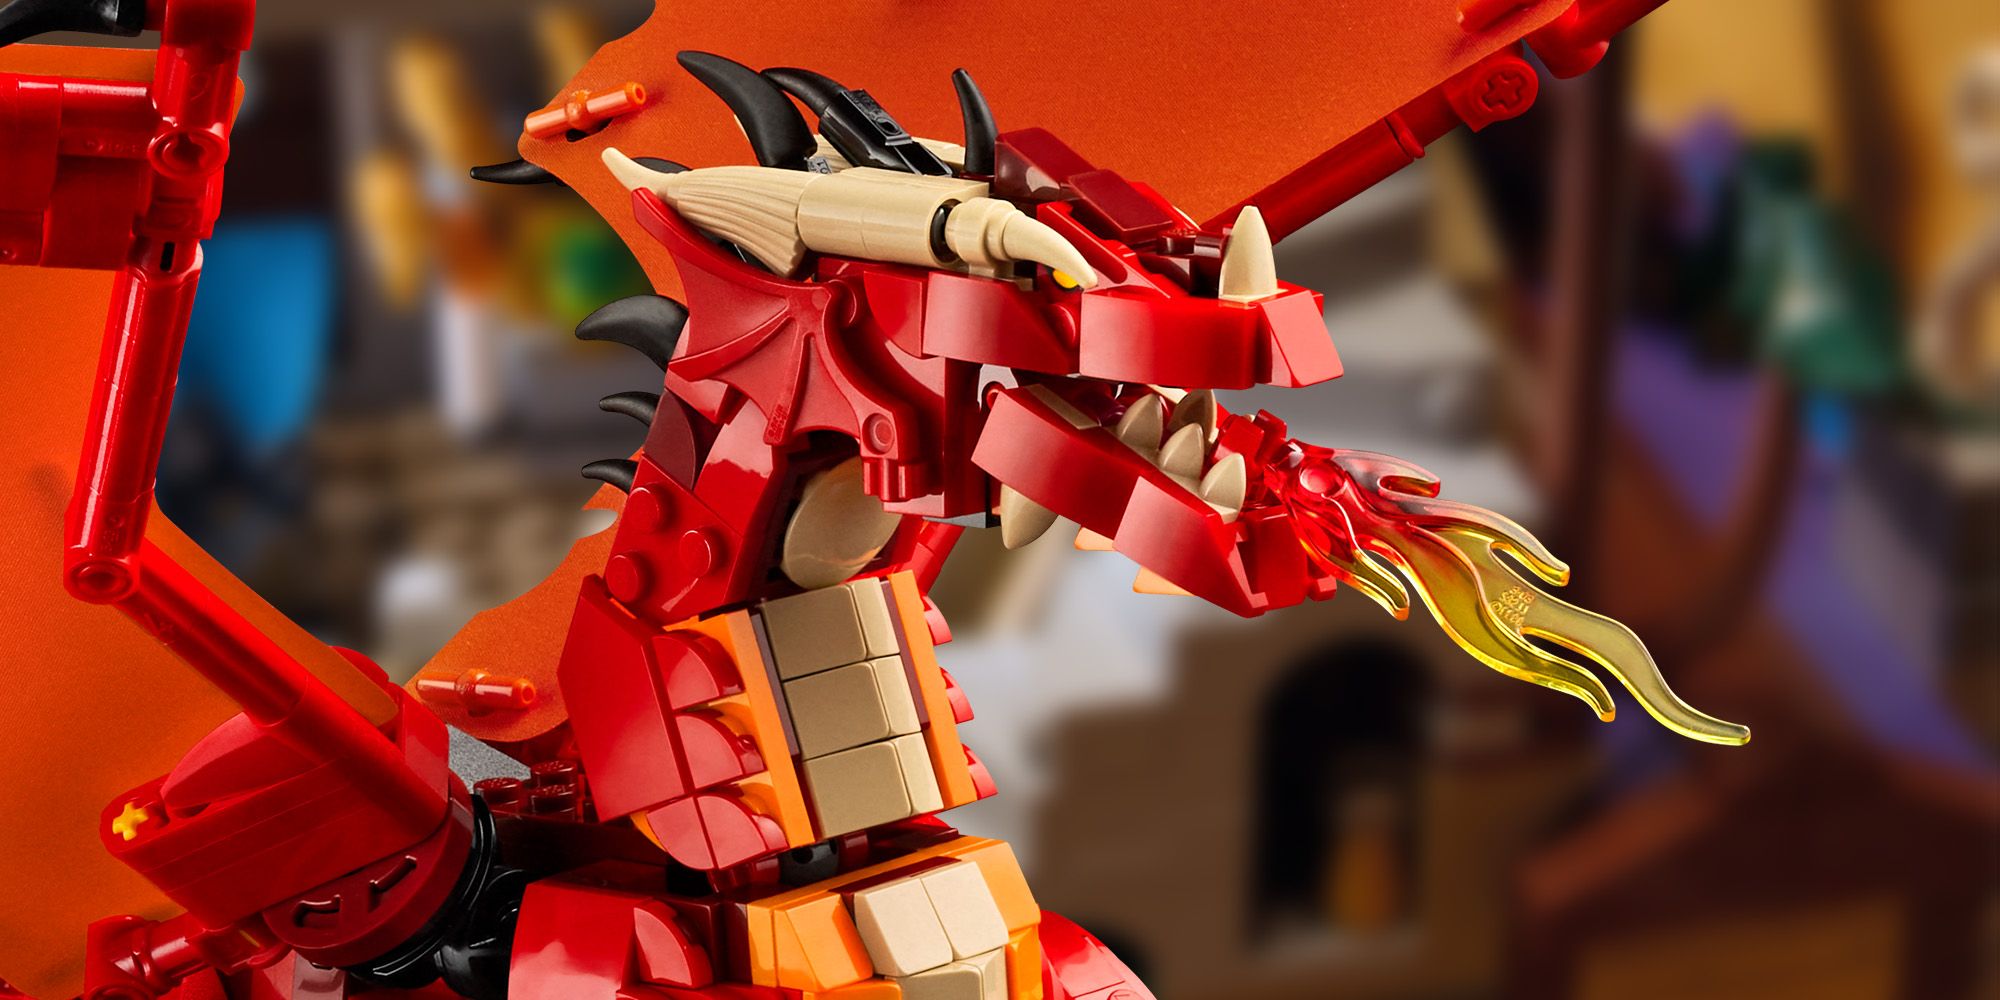 Red LEGO dragon in front of a blurred image of a crumbling tower build.